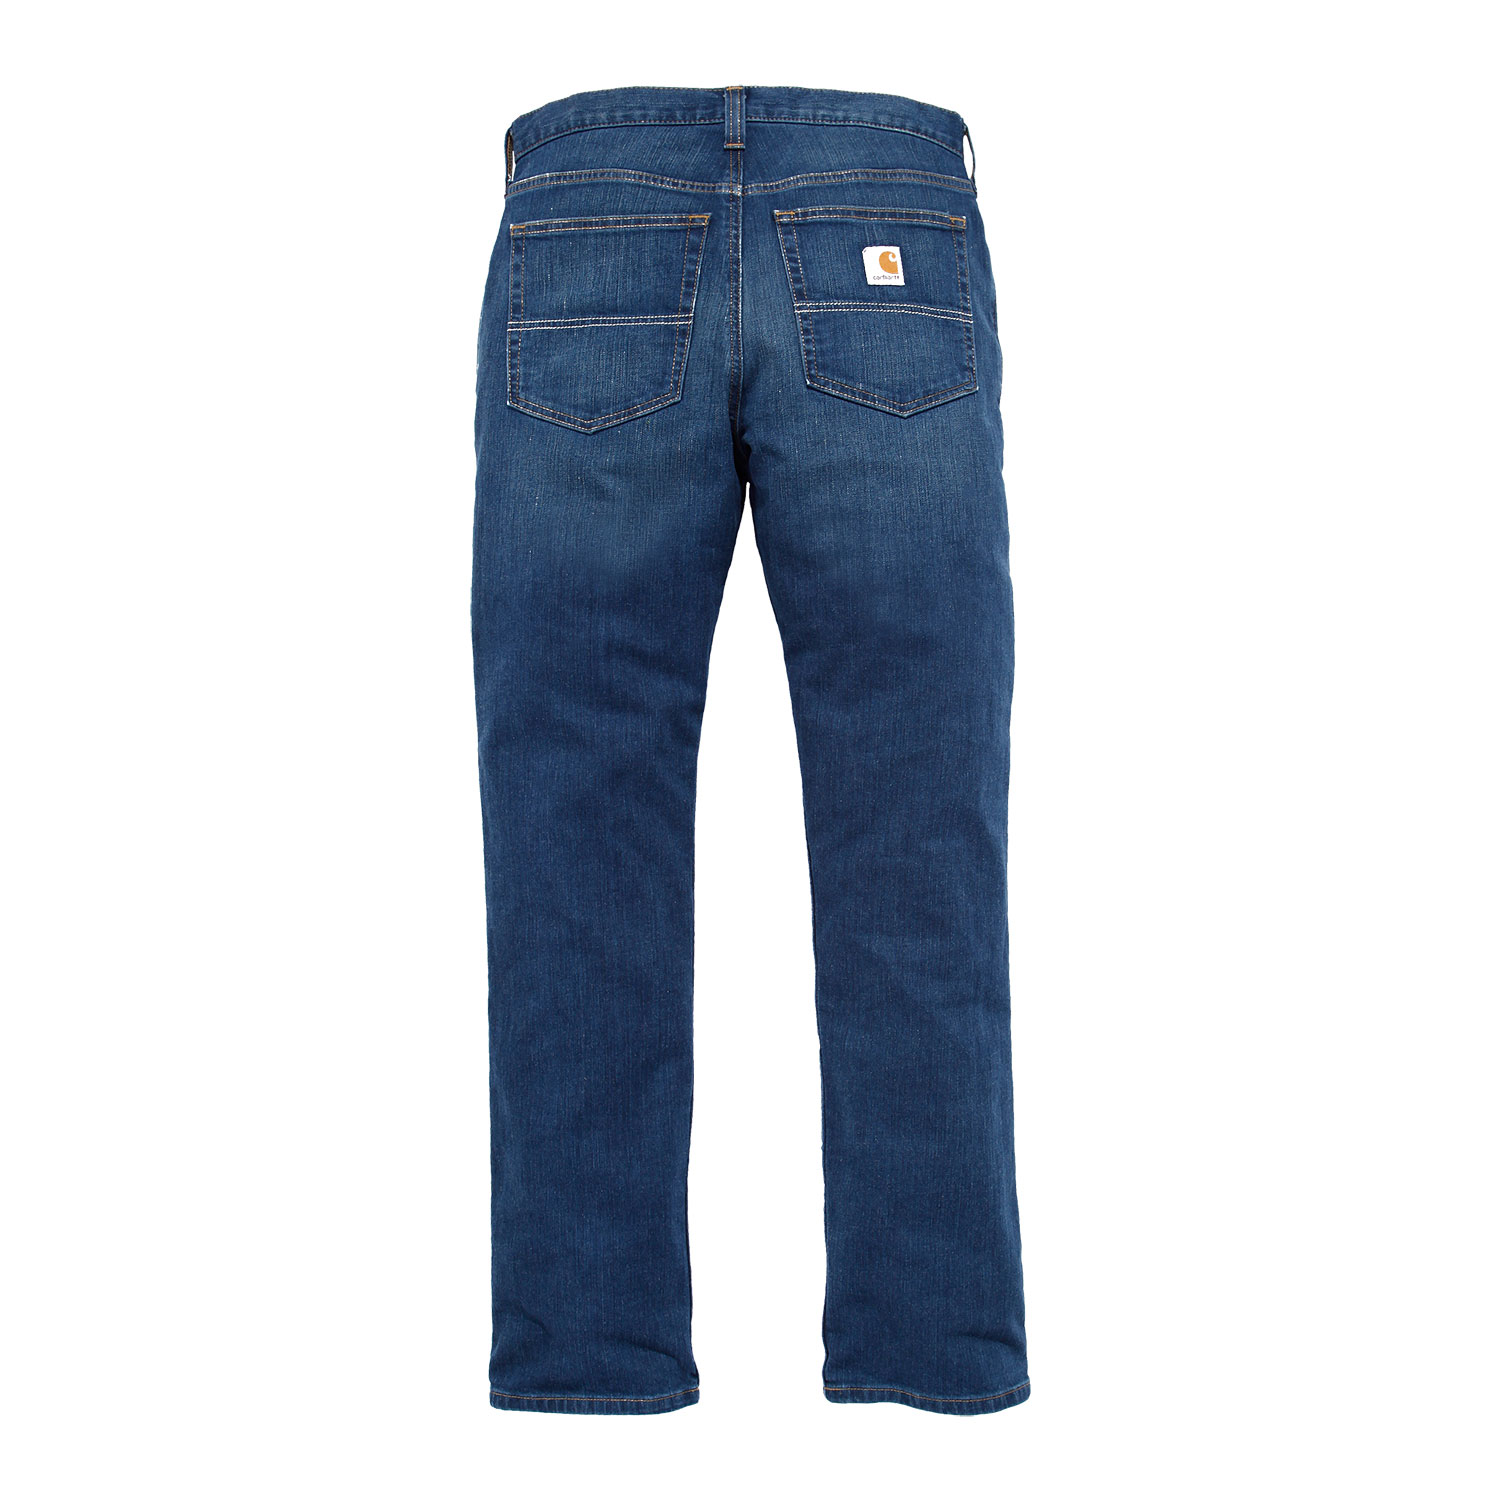 Carhartt Jeans Rugged Flex Relaxed Fit - 2